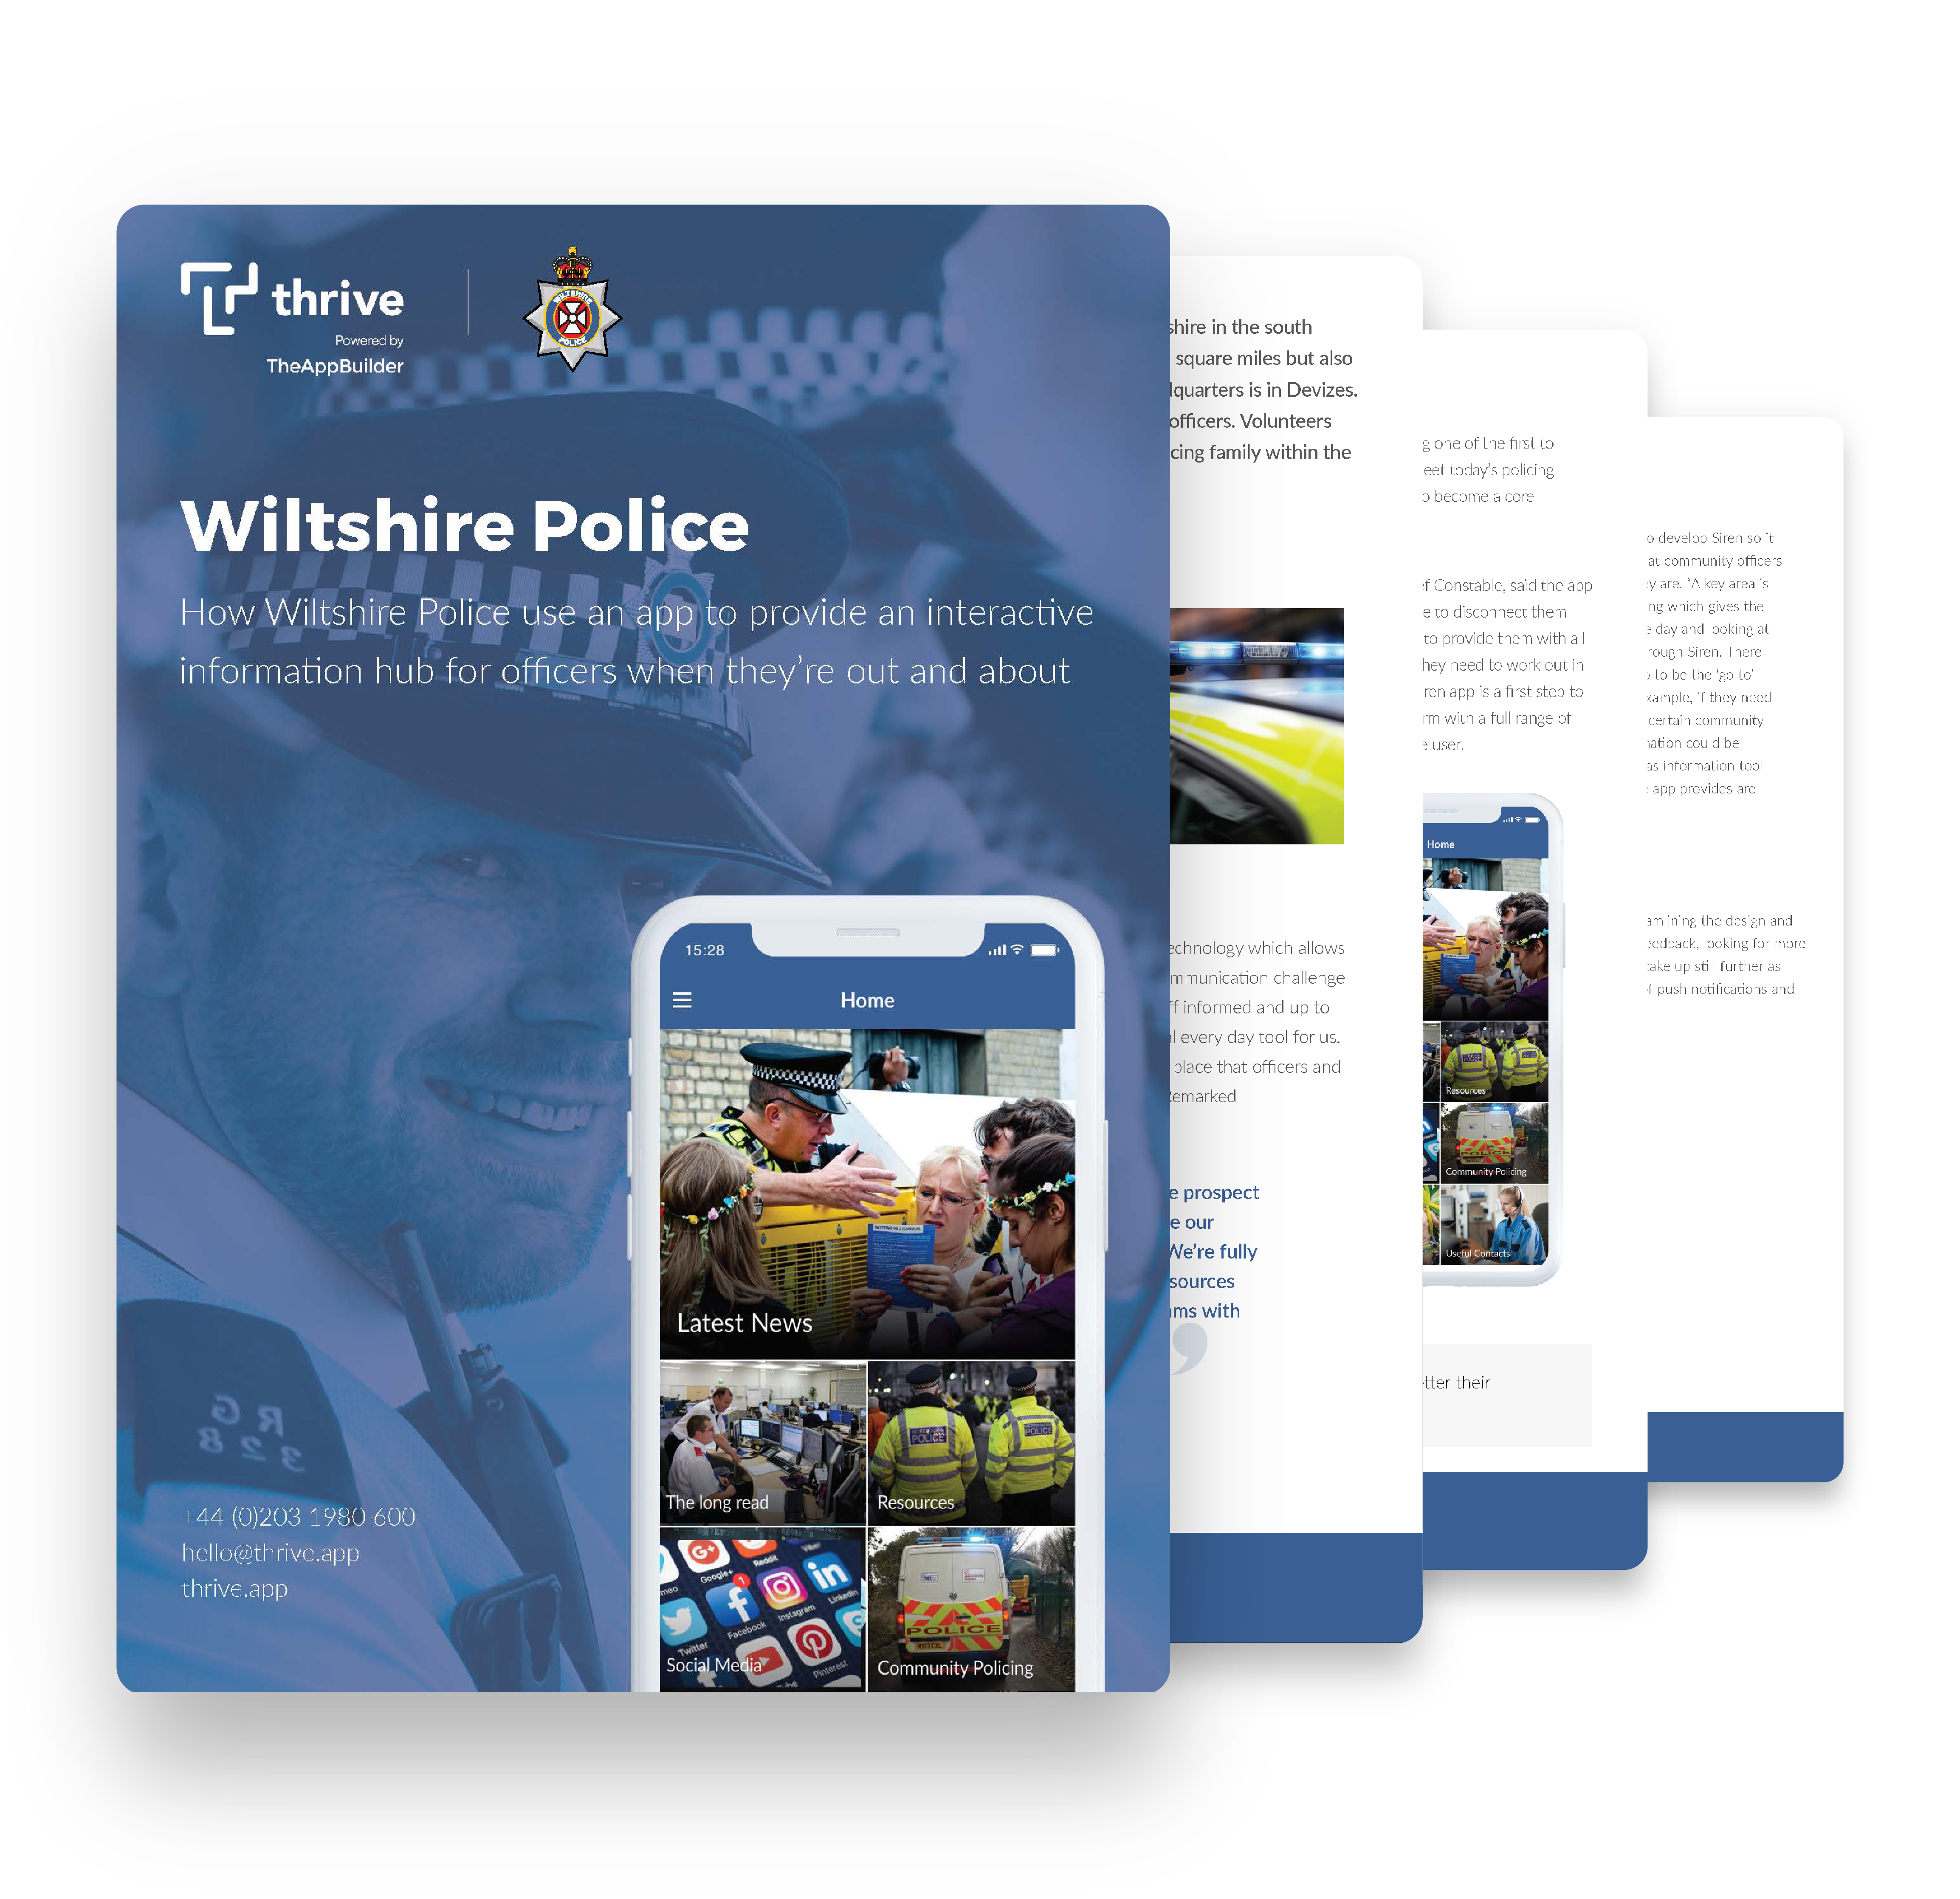 Whiltshire-Police communications app